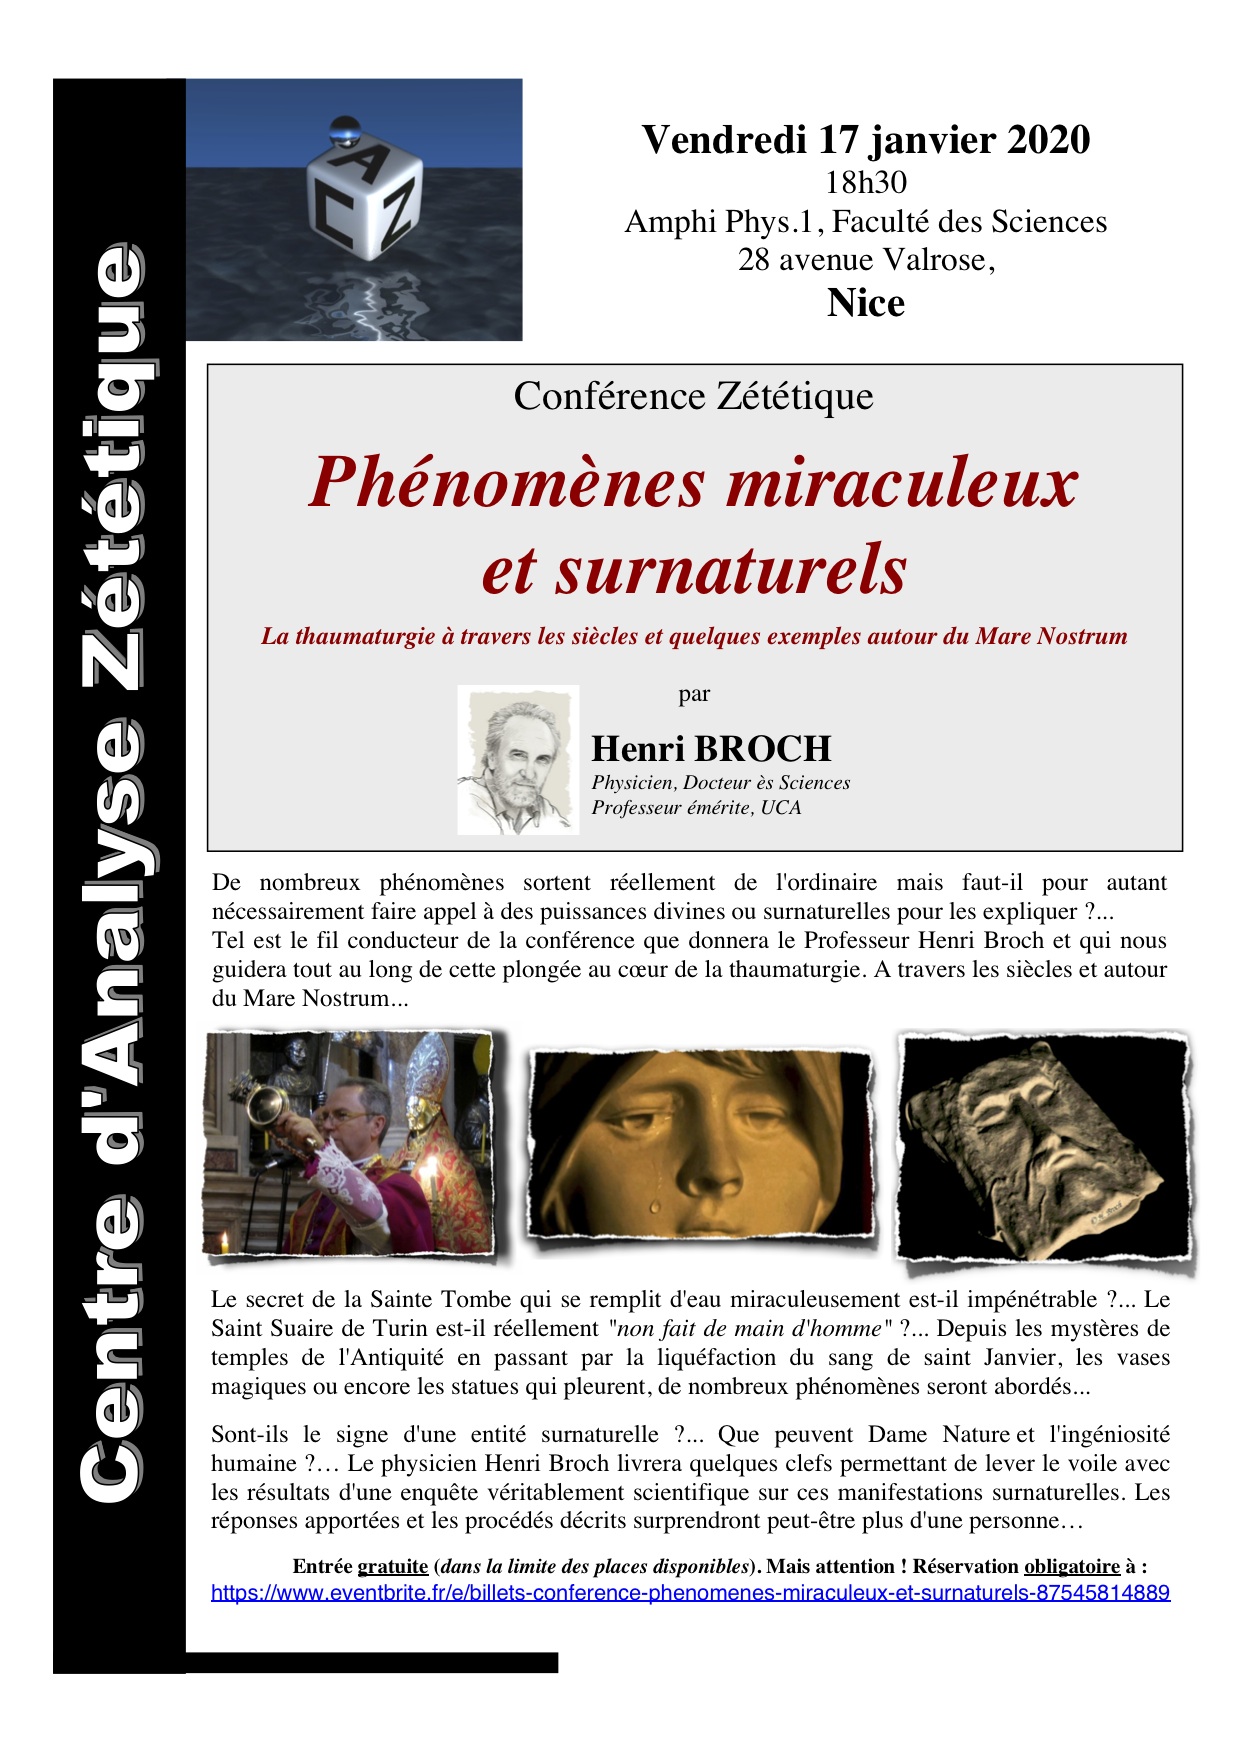 2020.01.17-Conf-HB-CAZ-Miracles